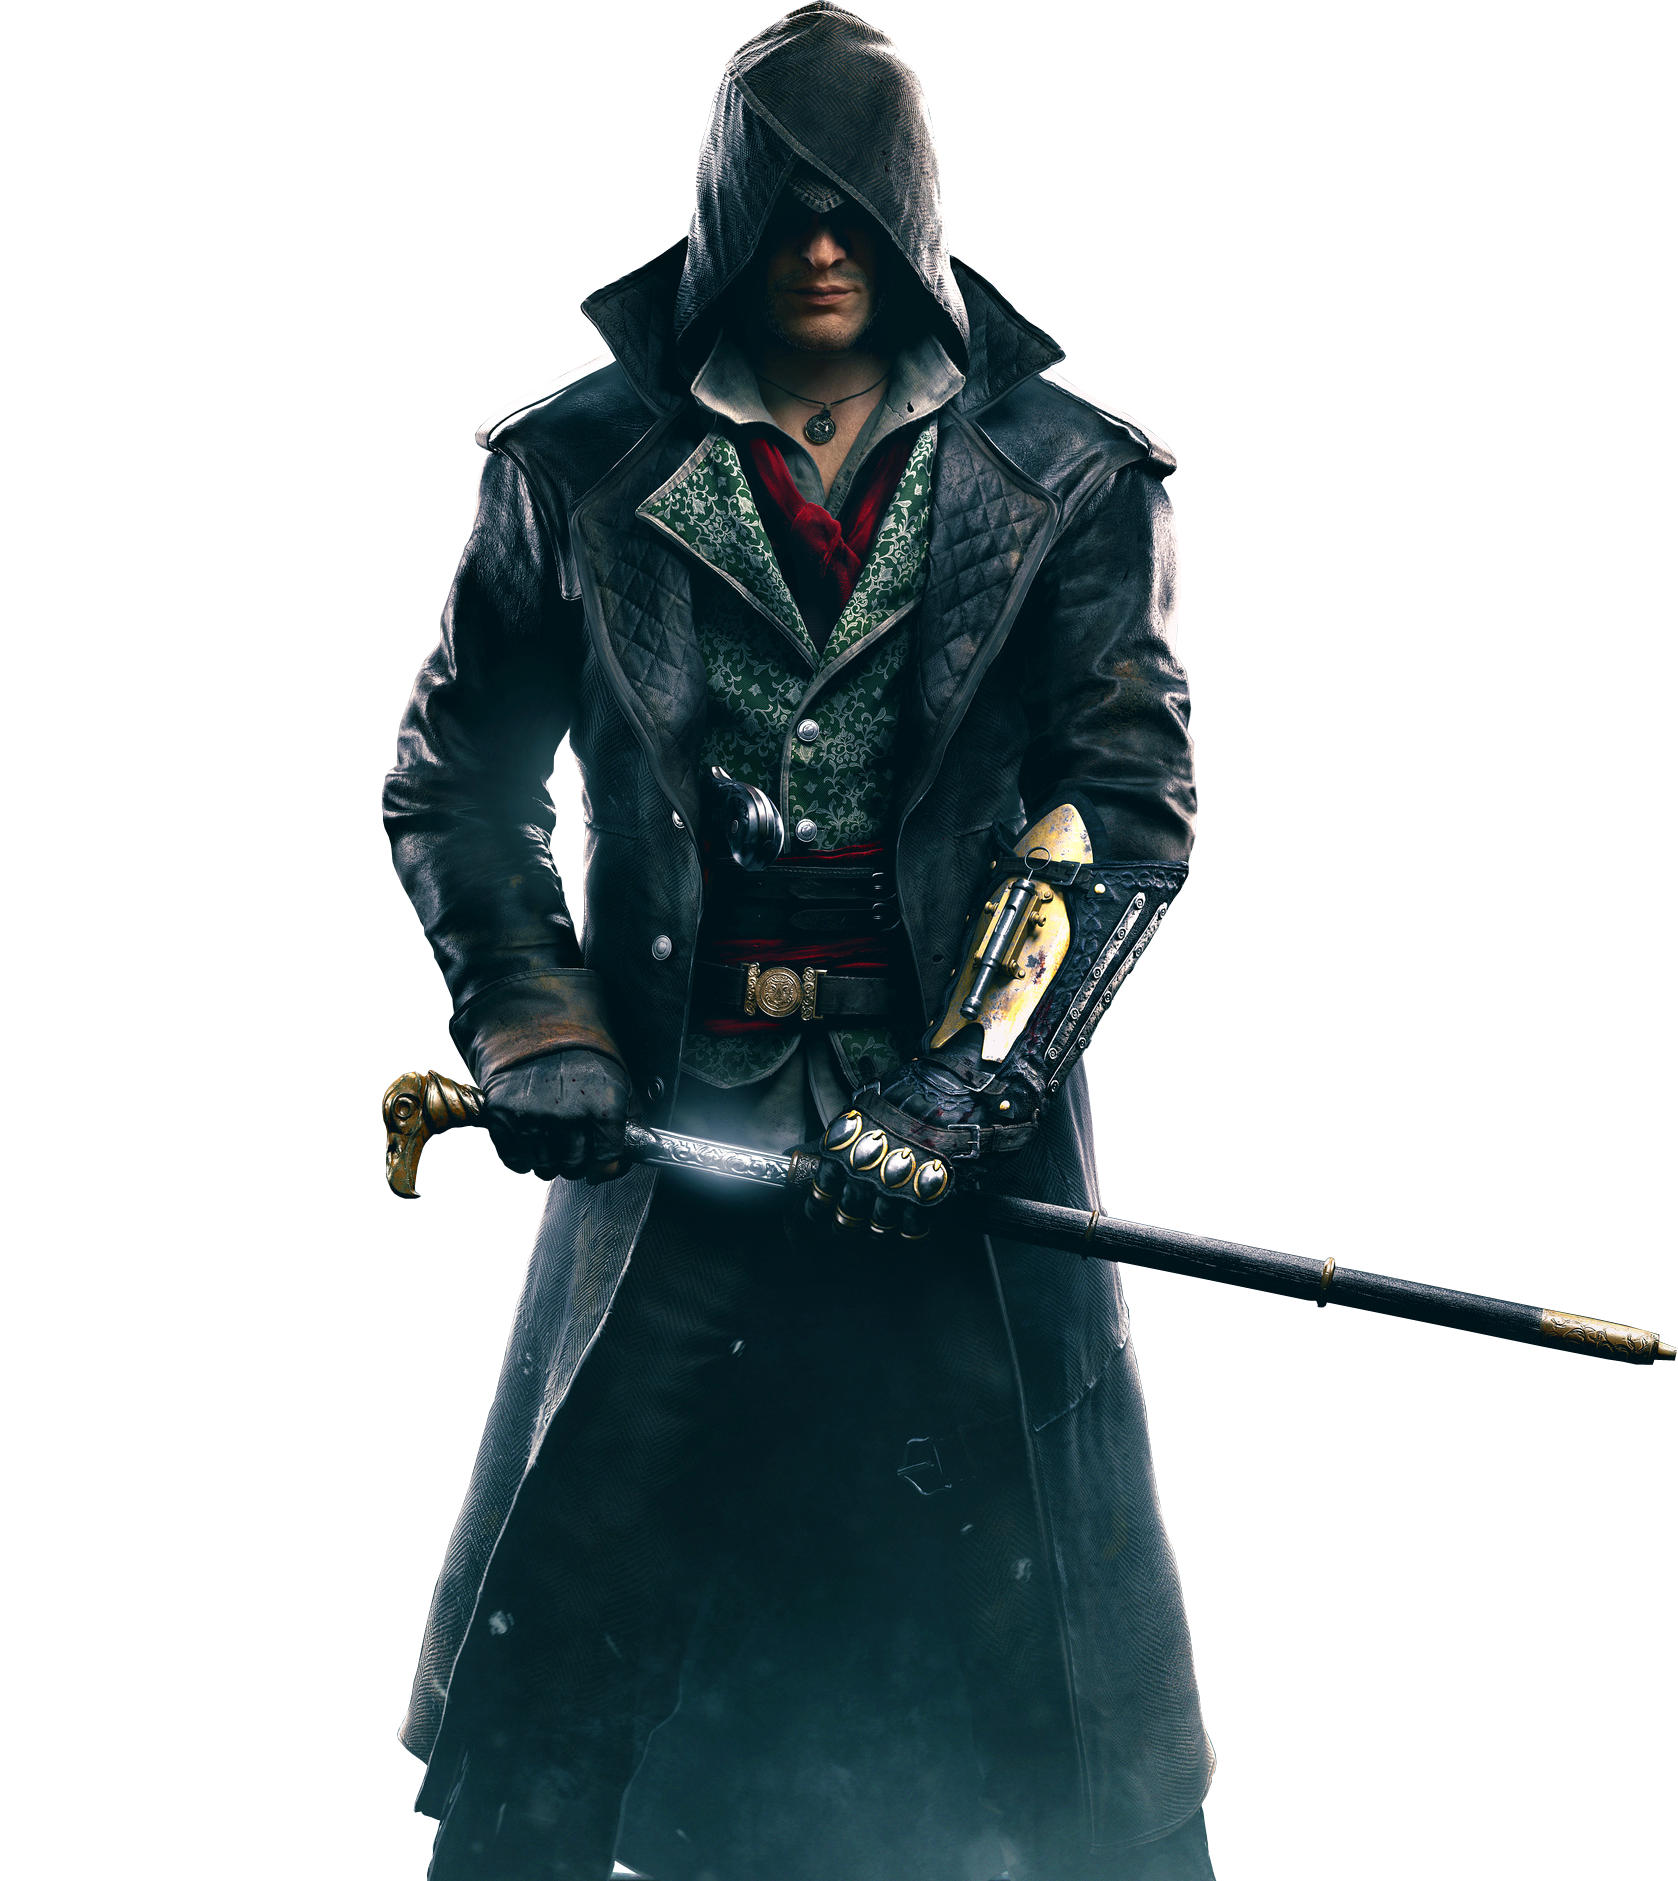 Assassins Creed Syndicate - J